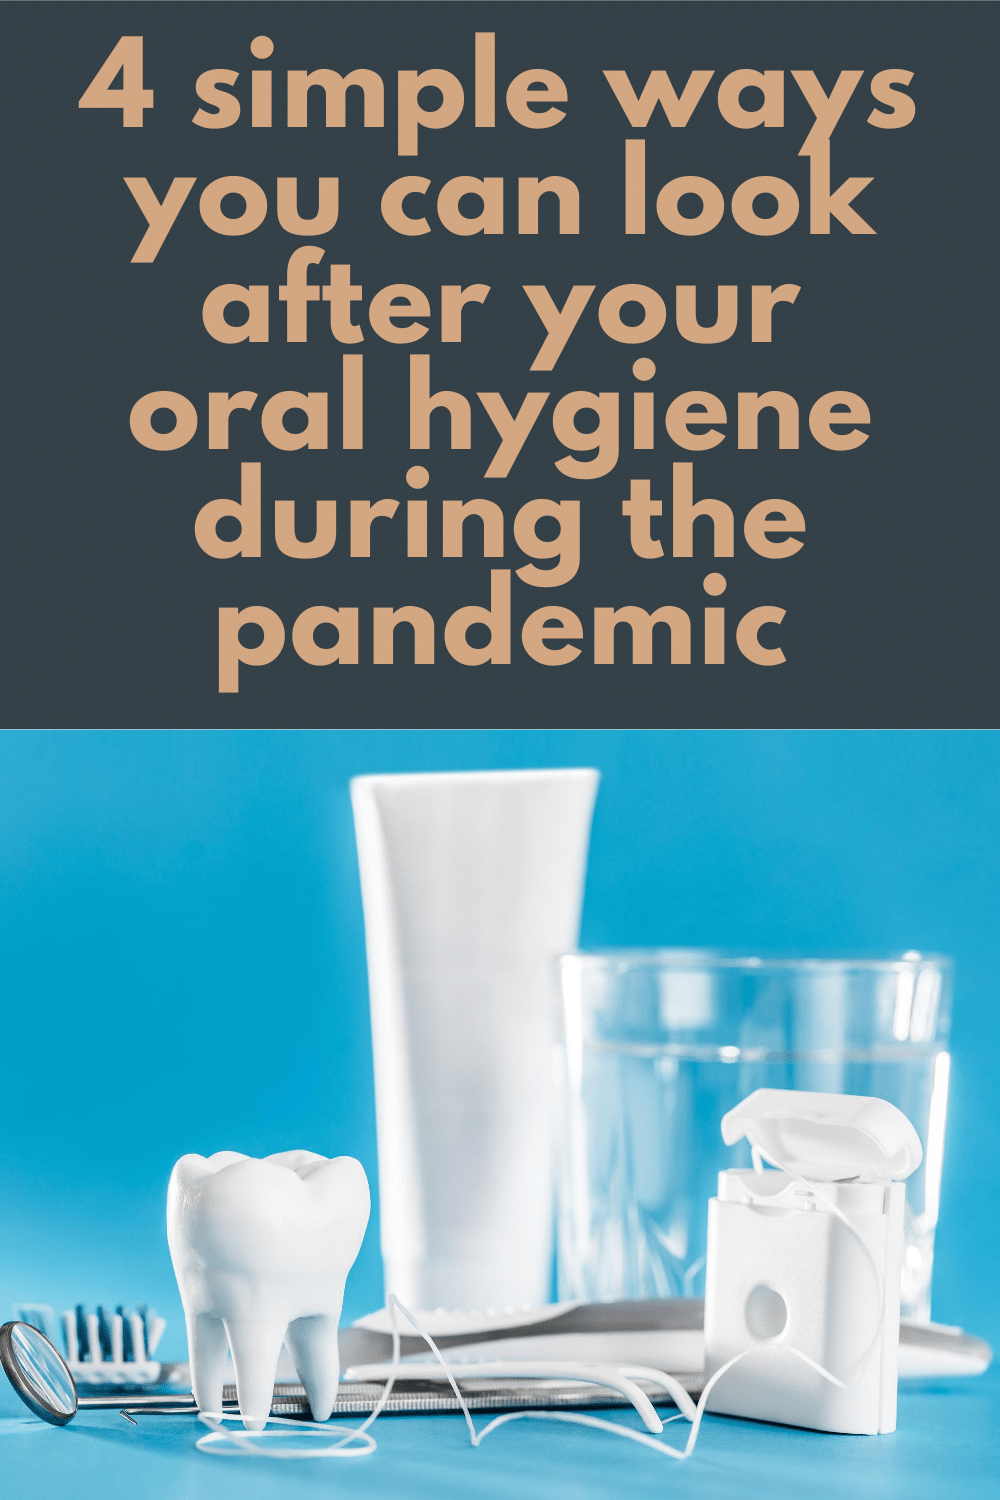 4 simple ways you can look after your oral hygiene during the pandemic